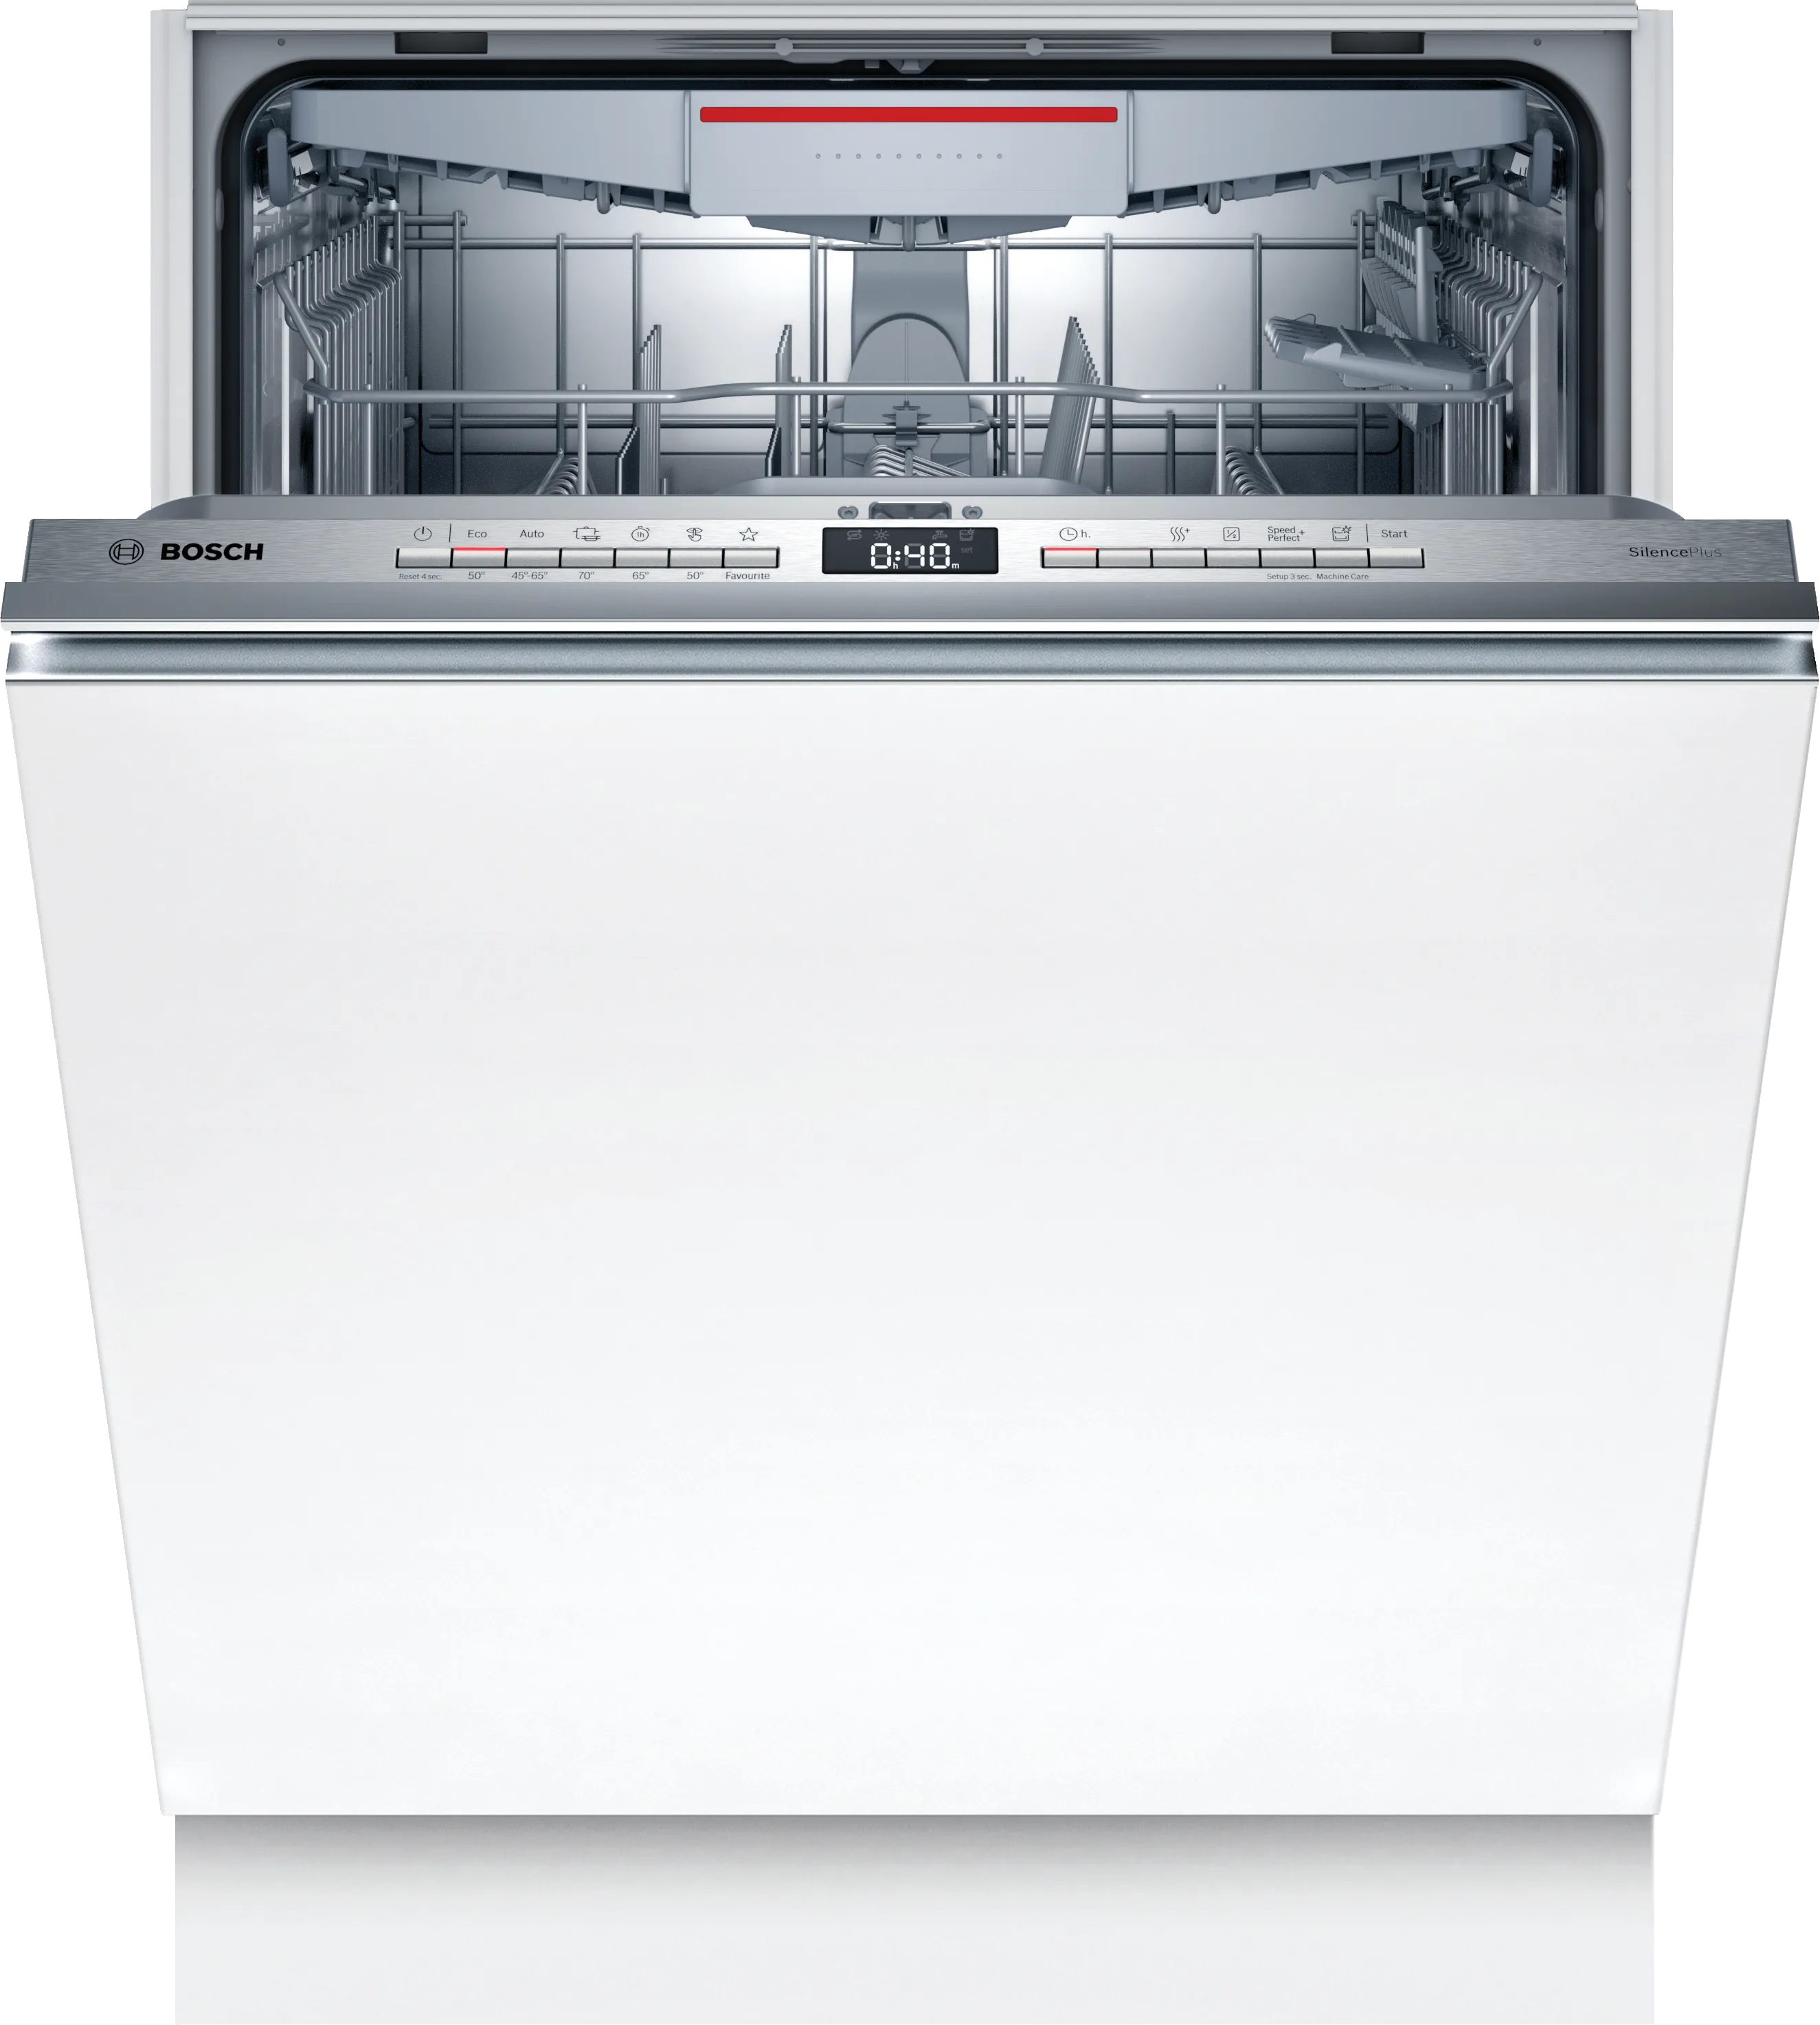 Series 4 fully-integrated dishwasher 60 cm 